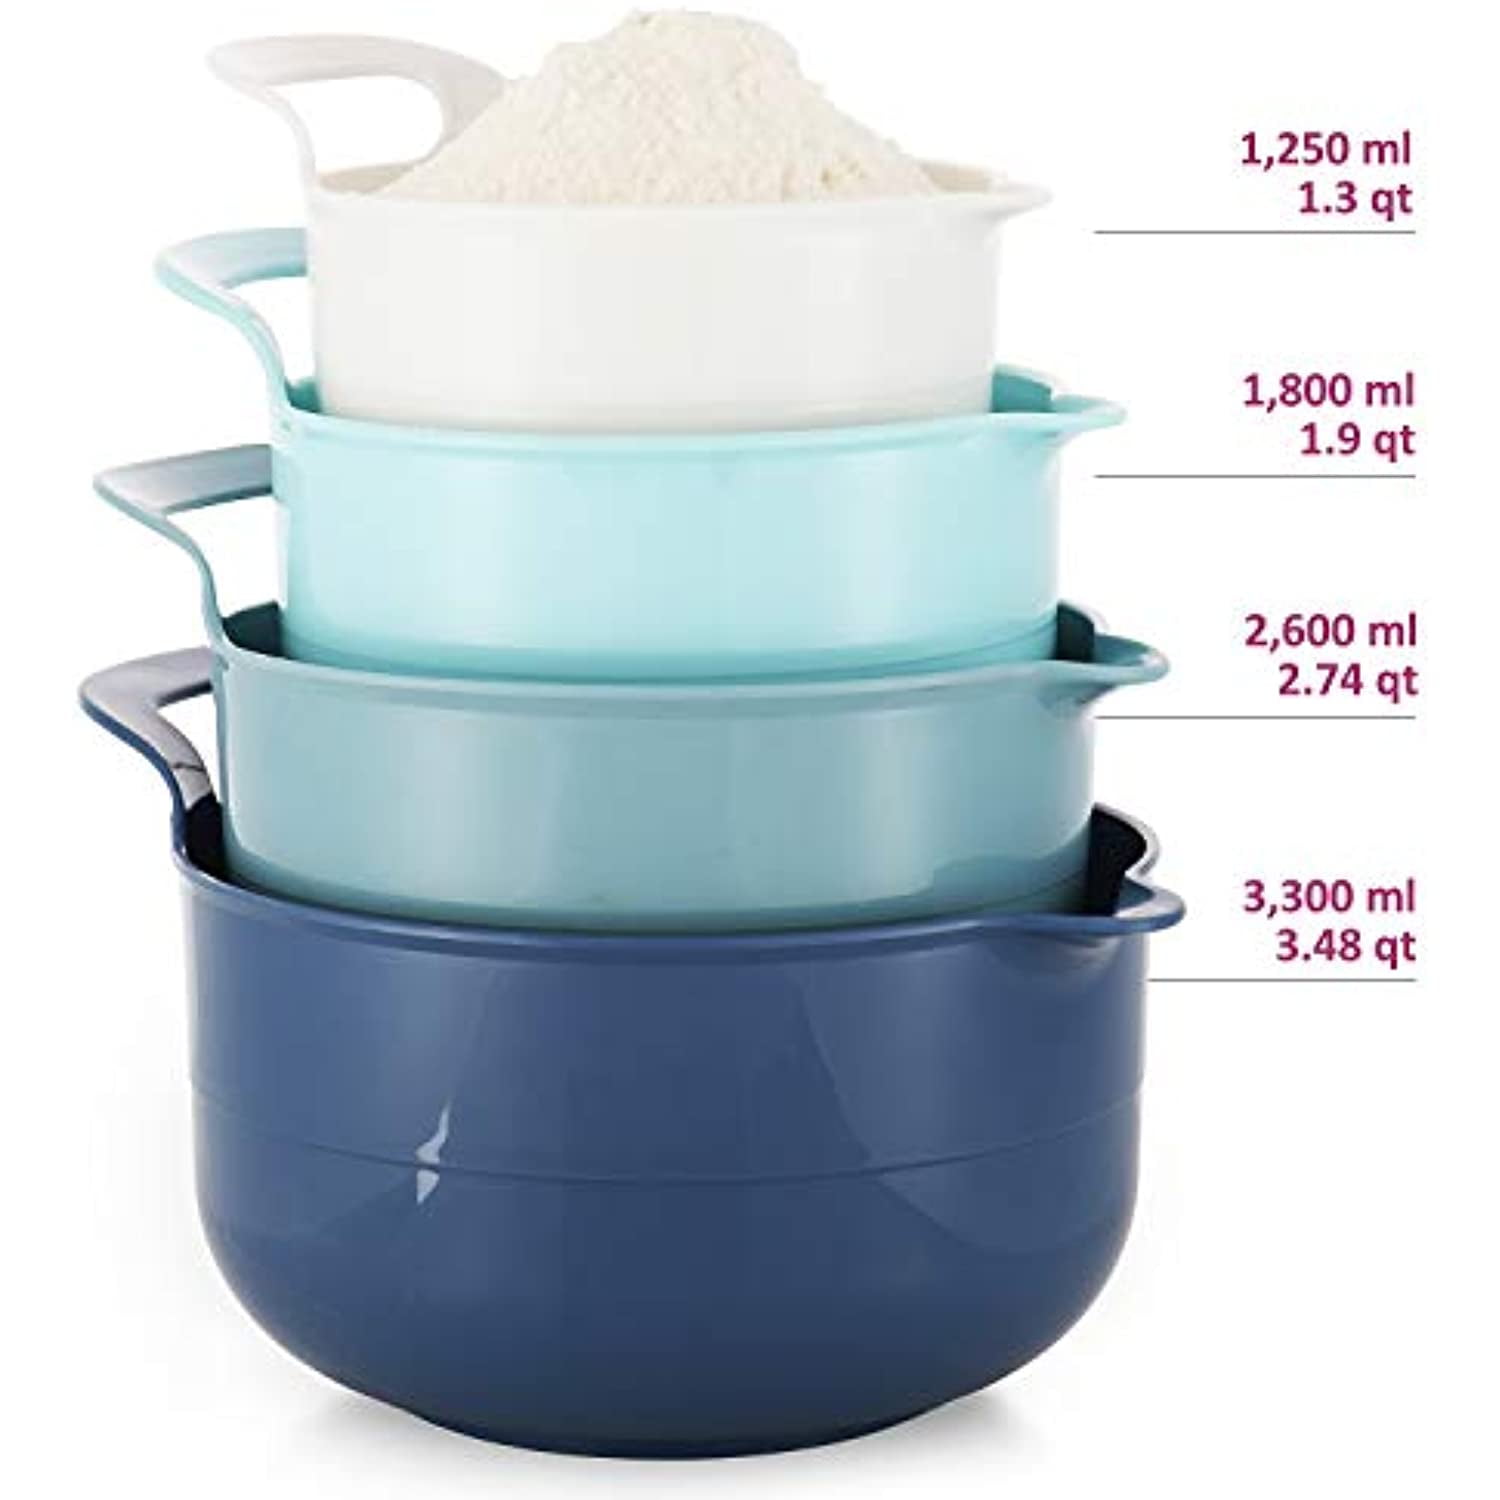 JCXivan Mixing Bowls with Lids Set,4 Piece Large Plastic Nesting Mixing  Bowls,Includes 4 Microwave safe Mixing Bowl and An Egg Whisk for Kitchen